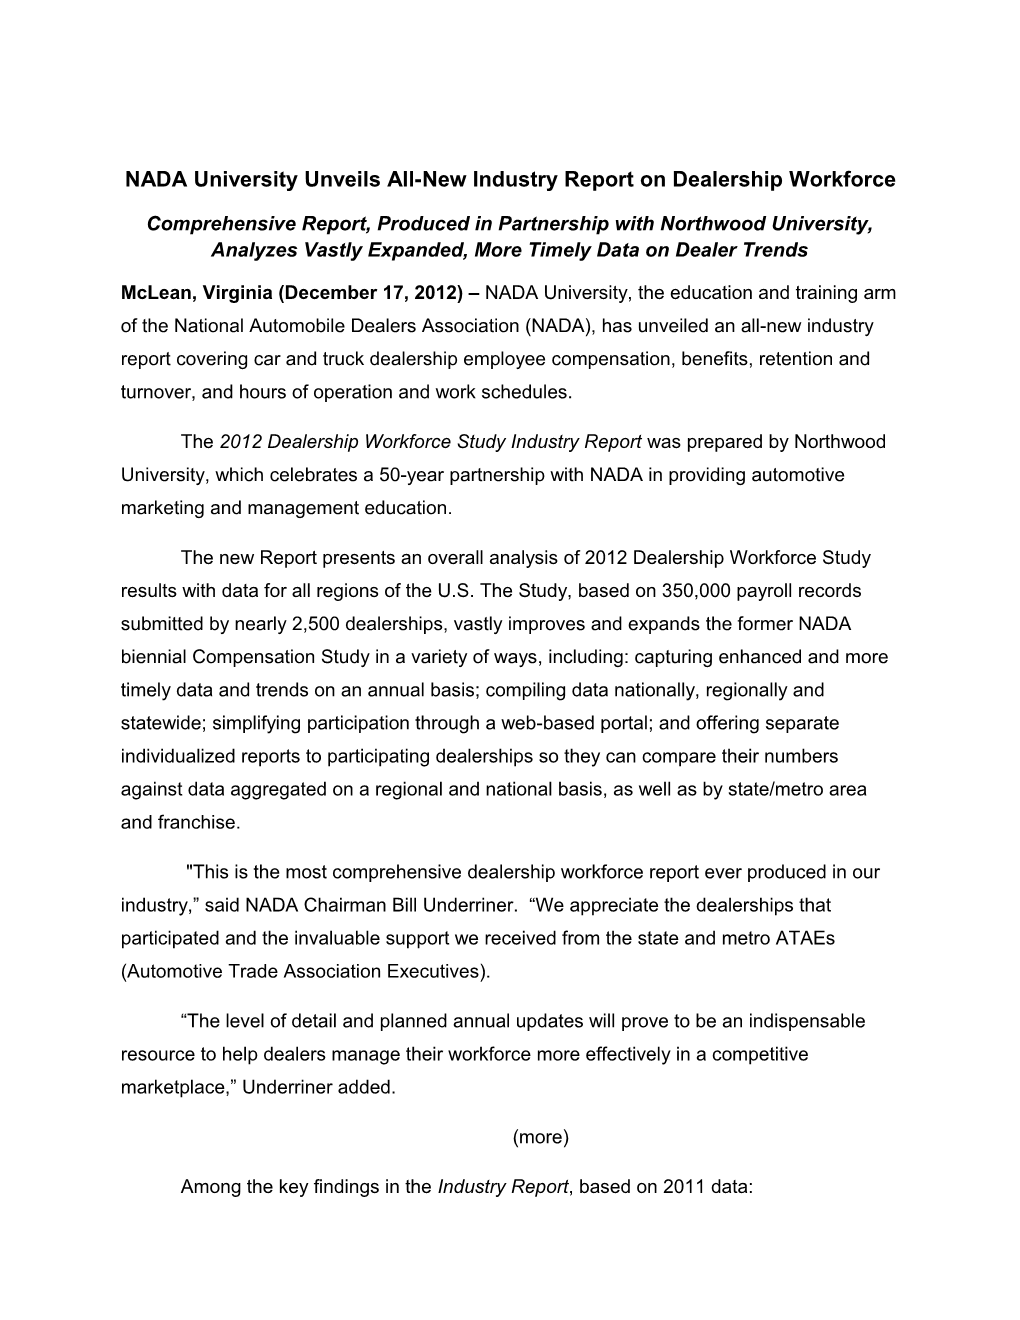 NADA University Unveils All-New Industry Report on Dealership Workforce